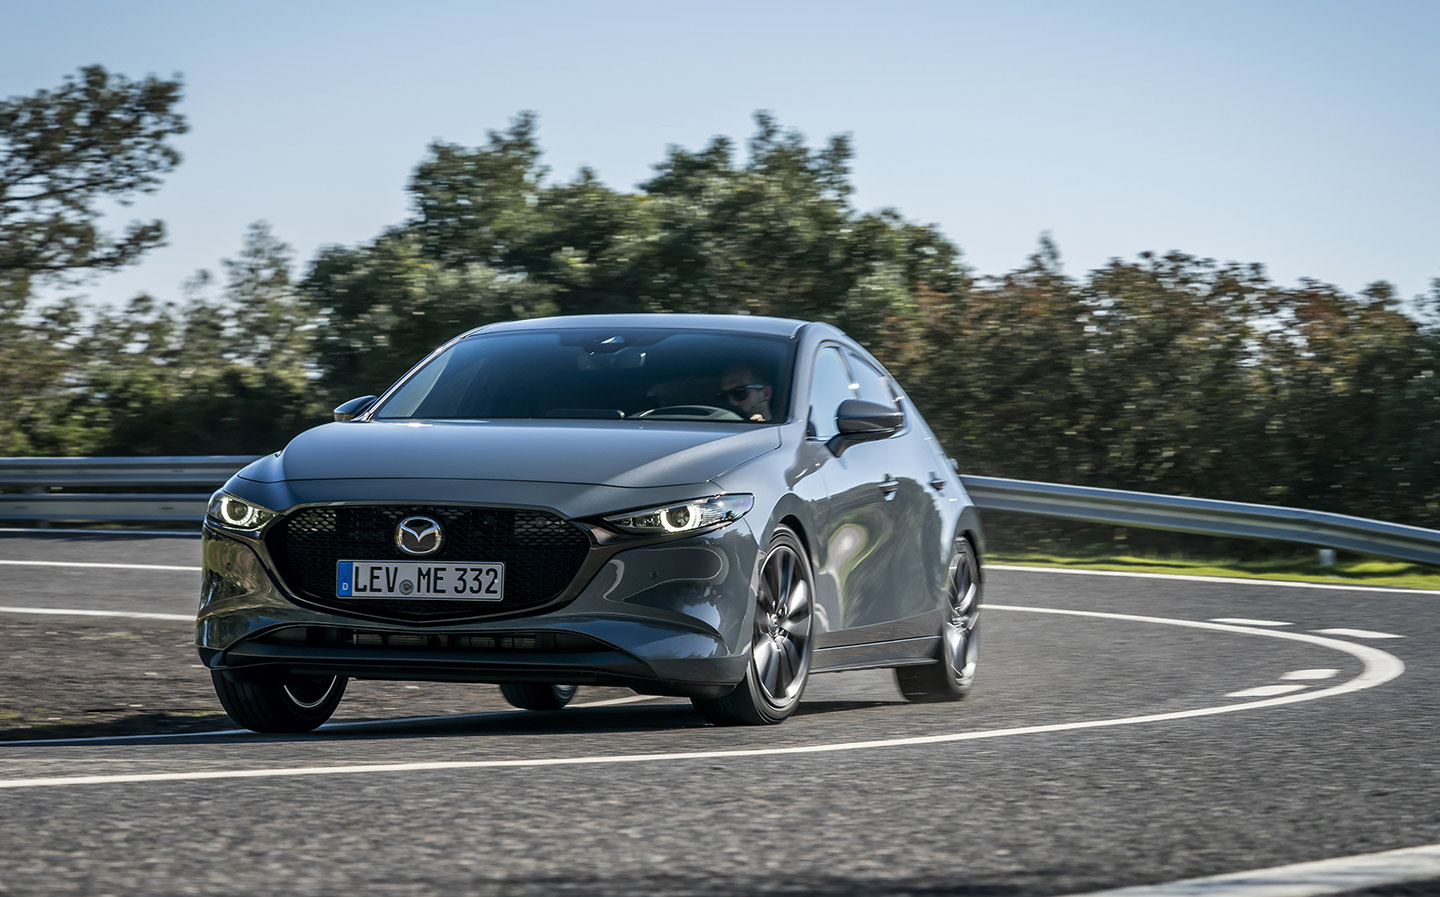 2019 Mazda 3 Mazda3 hatchback car review road test by James Mills for Sunday Times driving.co.uk